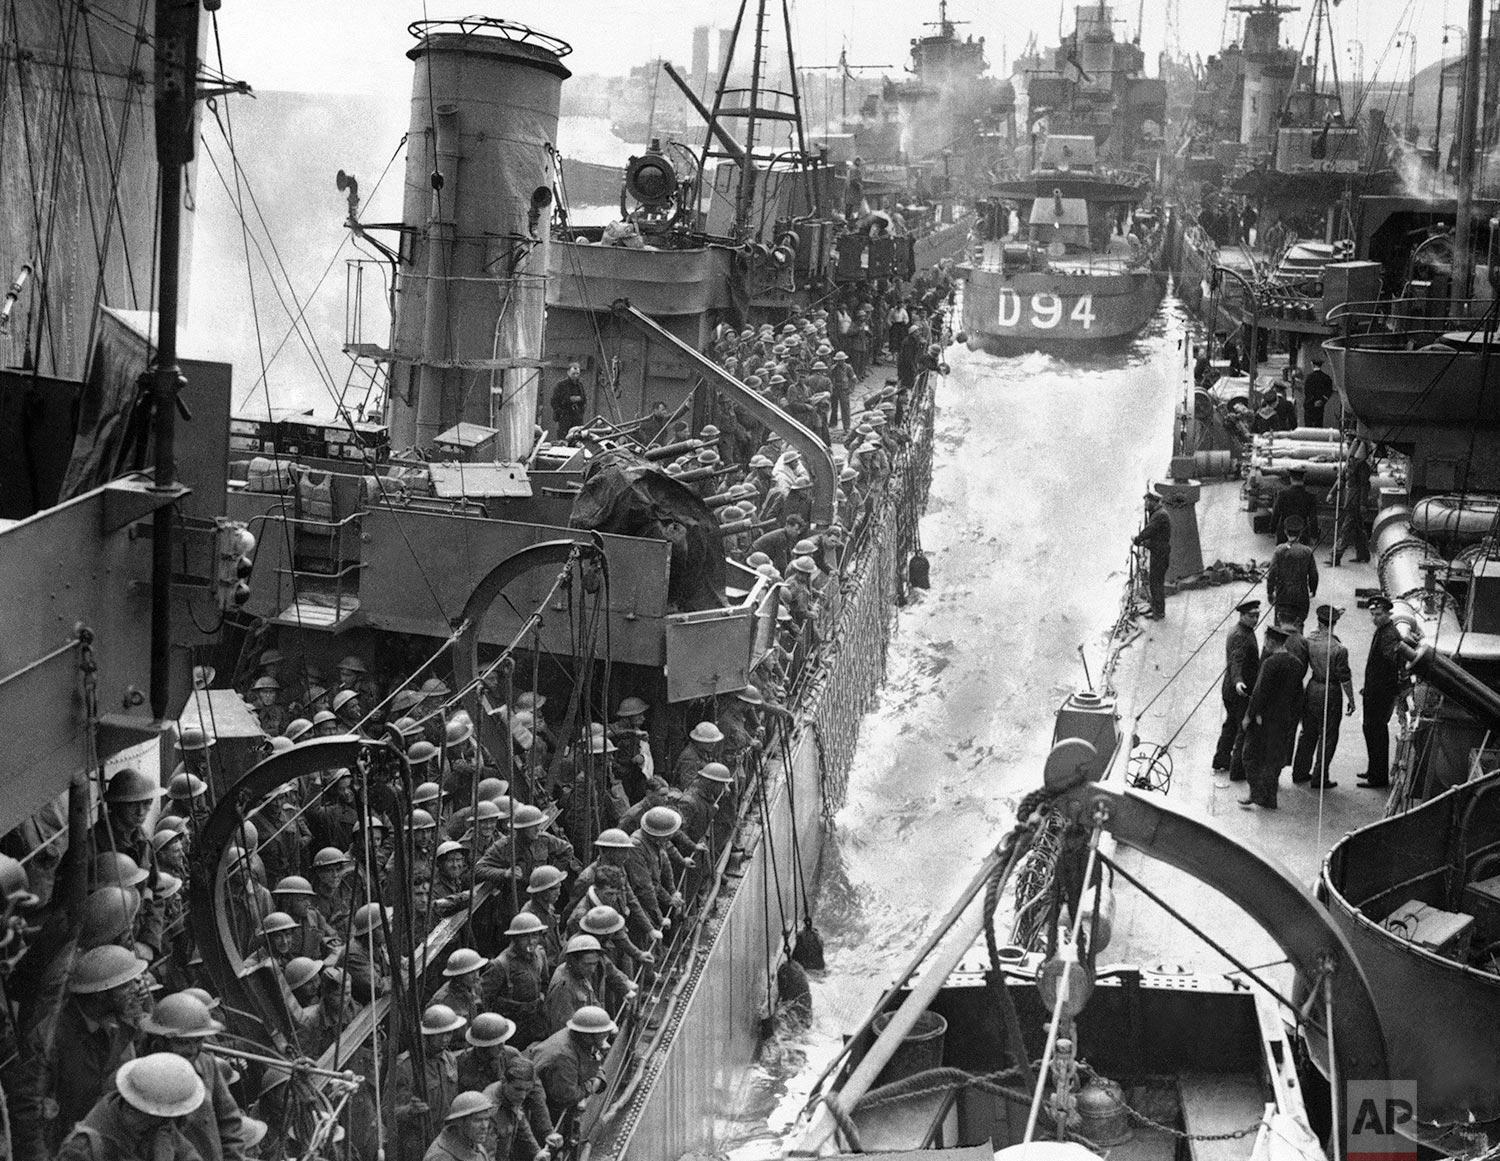  Men of the B.E.F. safely home after their gallant fight in Flanders seen on transport ships at the Quayside on June 6, 1940. Many sorts and sizes of vessels taking part in the grand evacuation from Dunkirk. (AP Photo) 